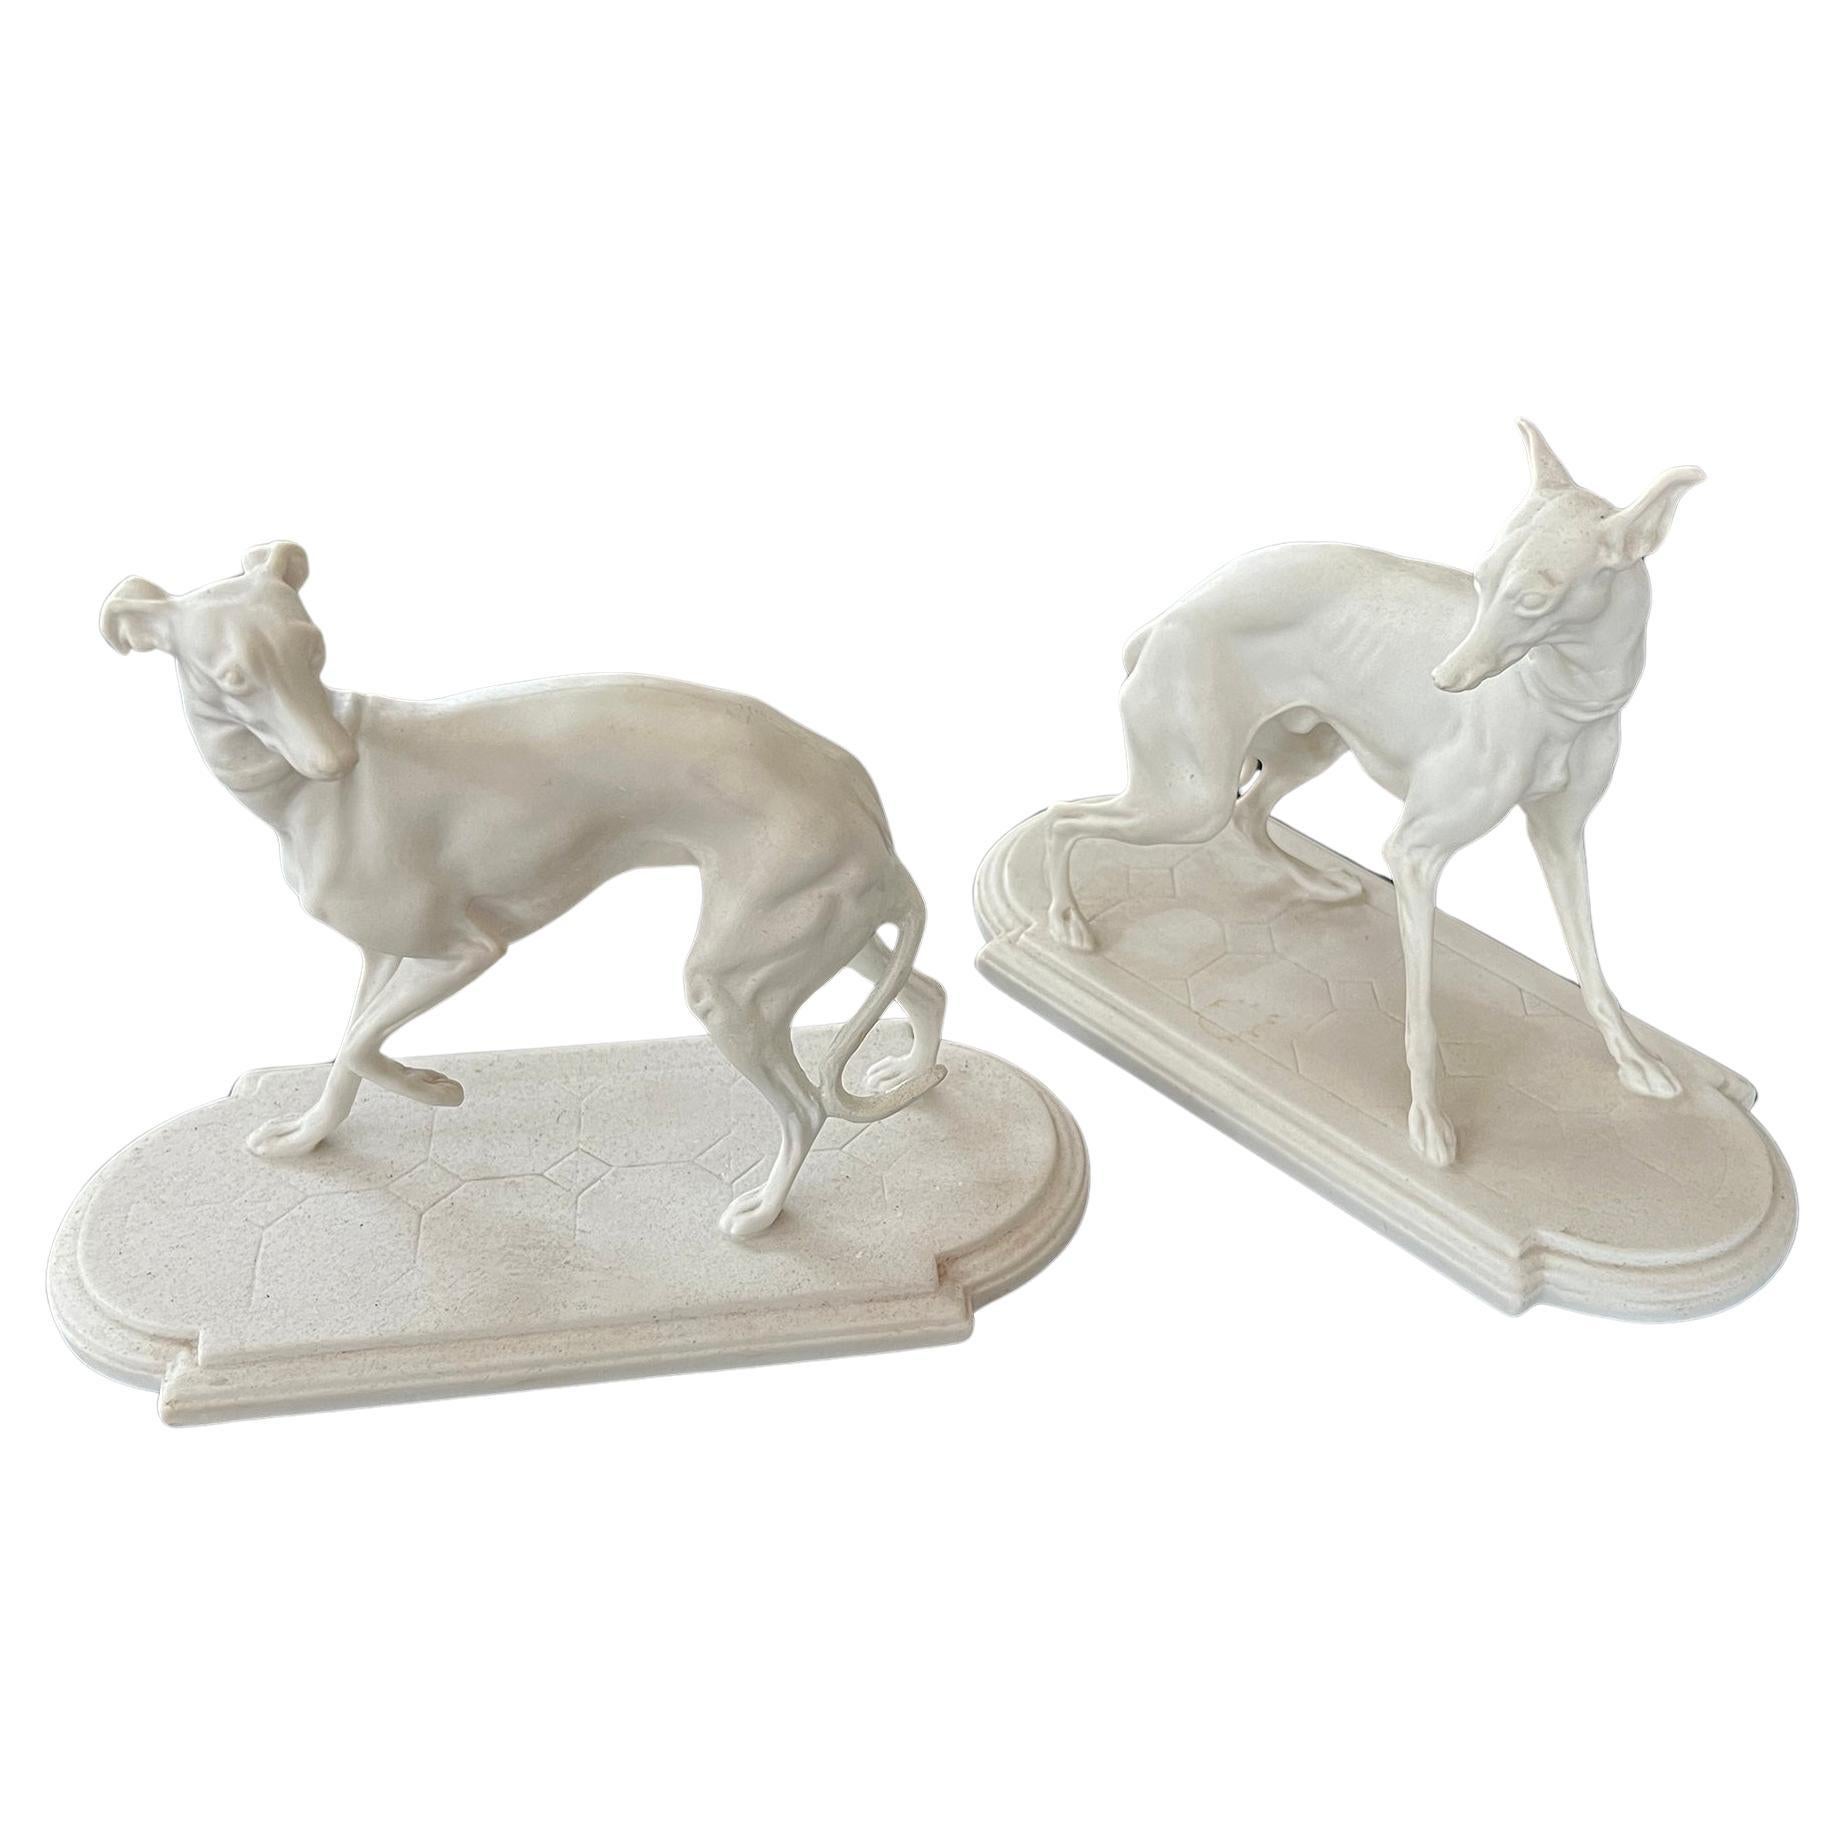 A Rare Pair of Bisque Porcelain Whippet Figurines by Boehm Studios For Sale